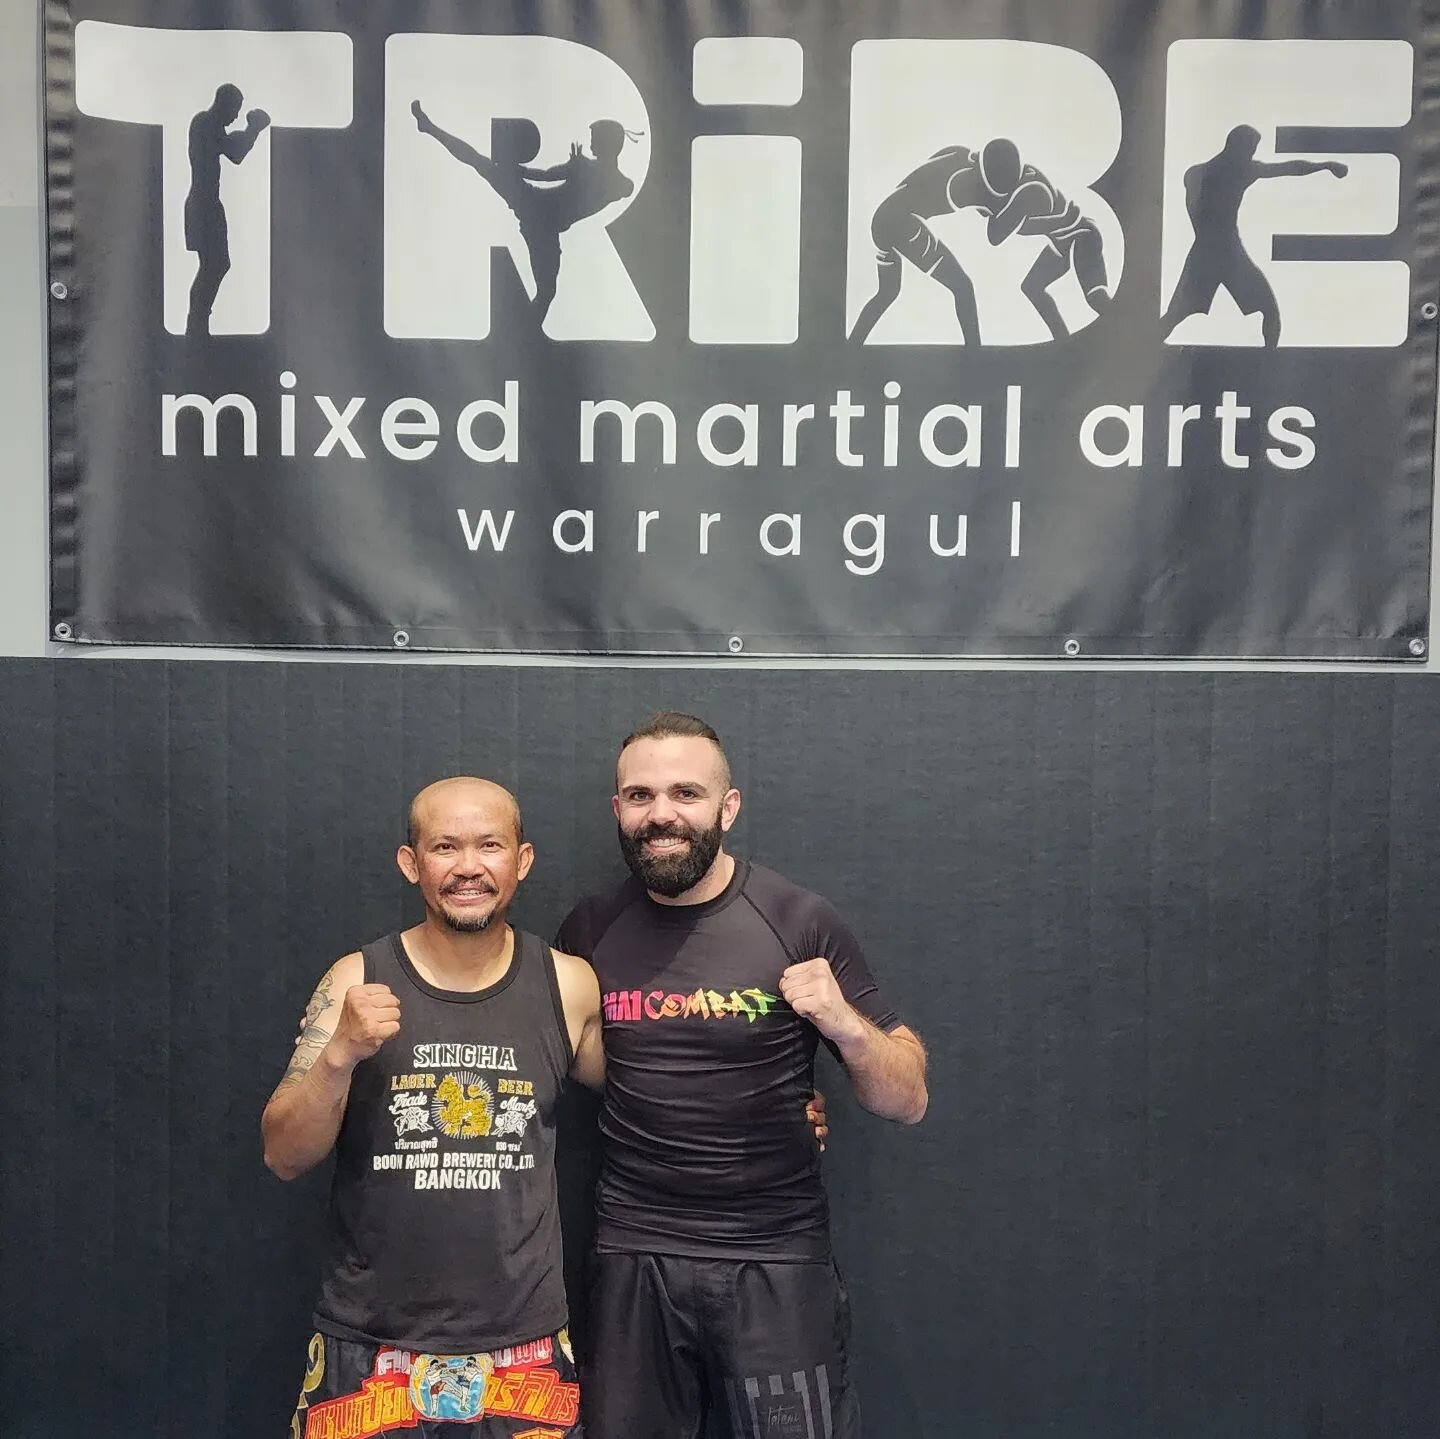 WELCOME JOJO !!
So excited to share Jojo will be joining us Tuesday nights helping with our 5:30pm Muay Thai class. 
He is also available for 1:1 coaching at only $40 for 30min, $70 an hour, or $80 for 2 people on a Tuesday! 

Jojo actually cornered 